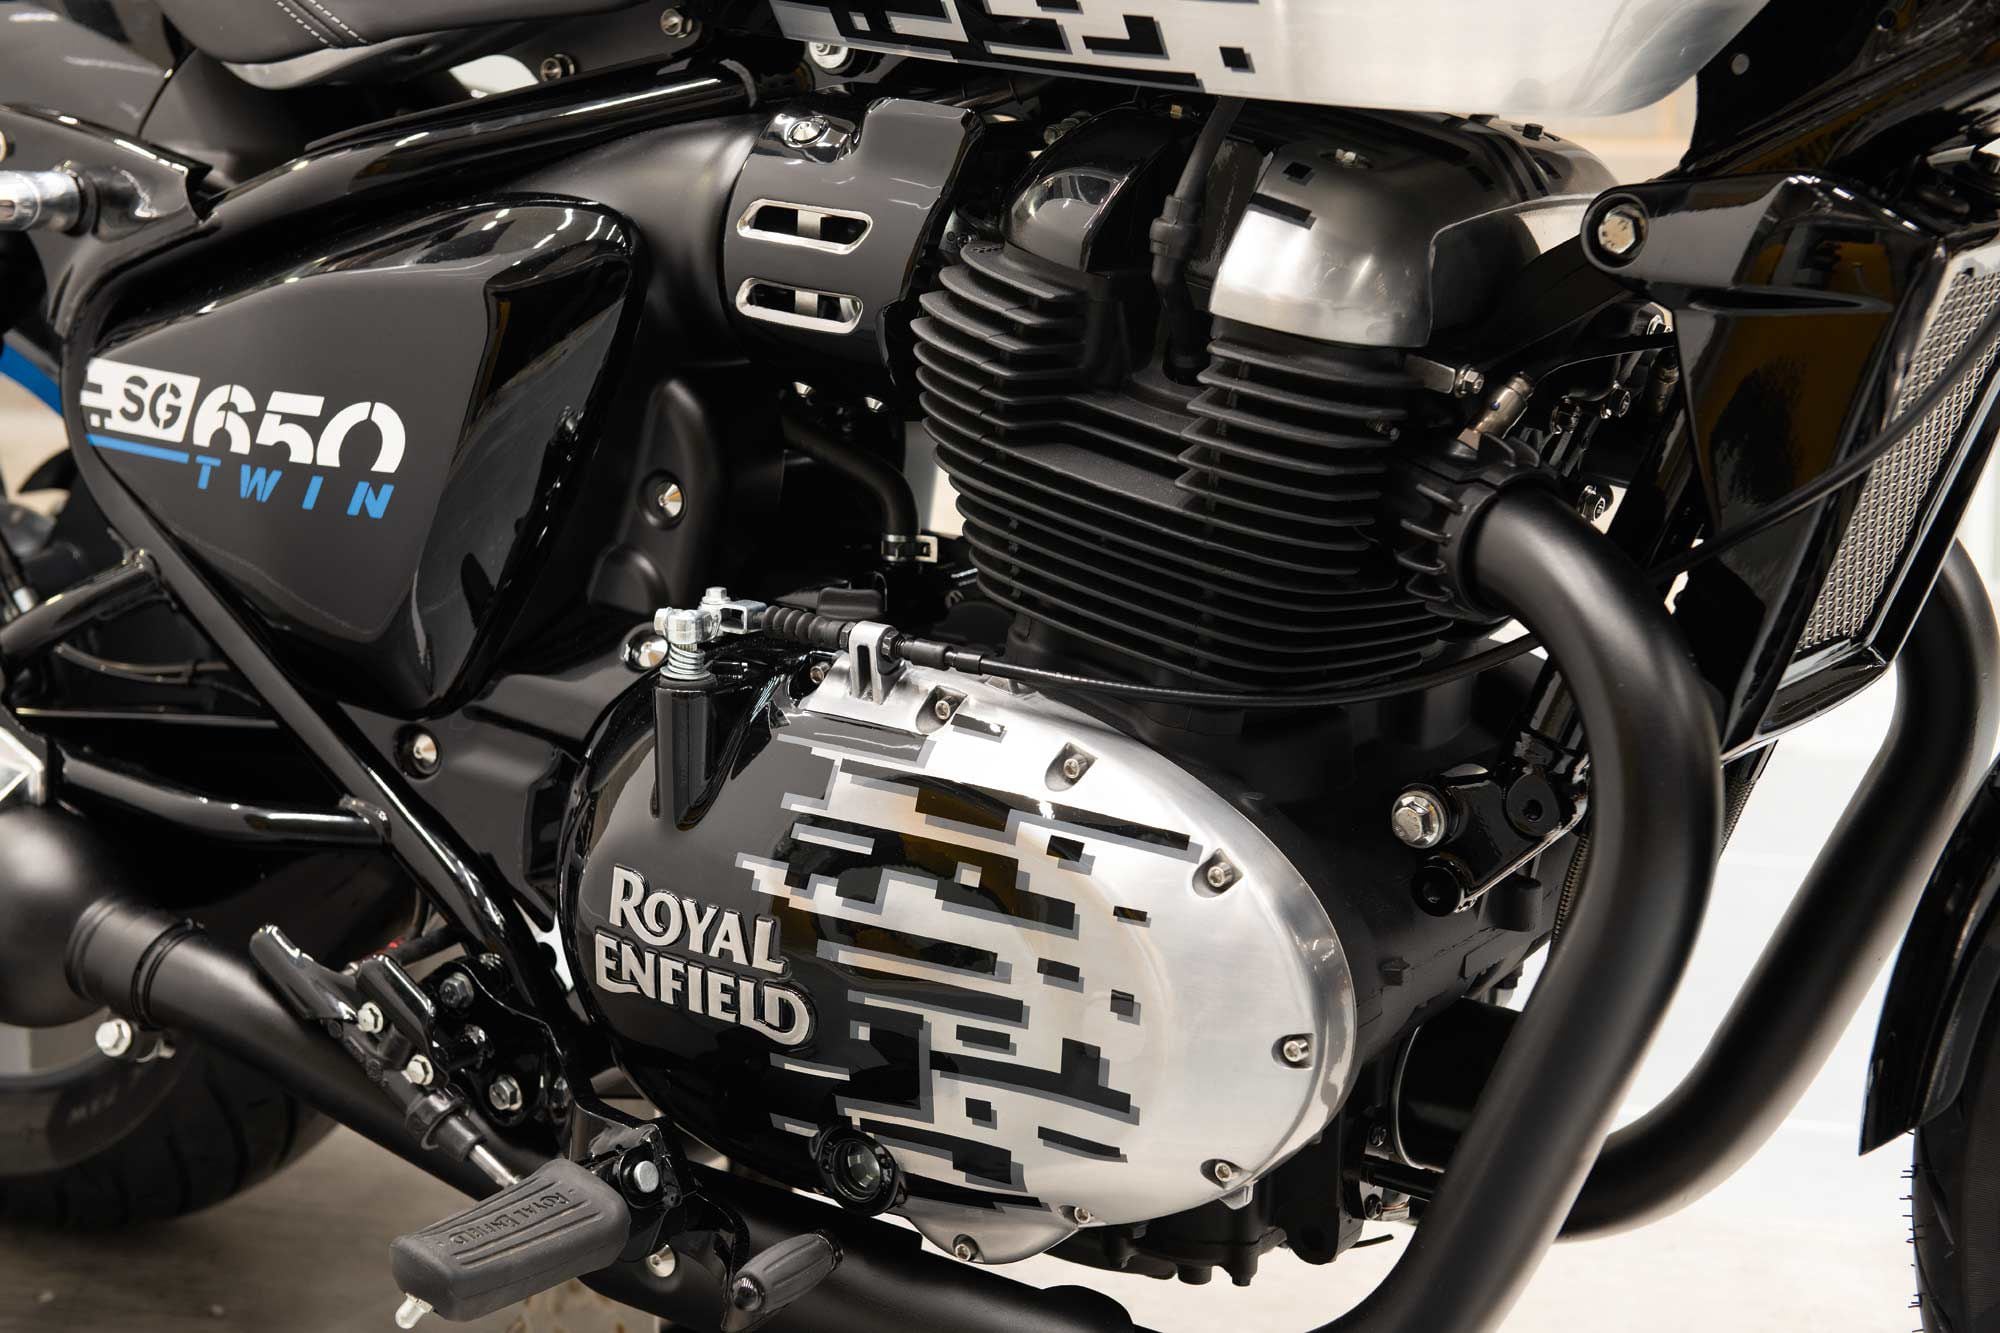 The SG650 is powered by the same 650 P-twin engine as the INT650 and Continental GT.